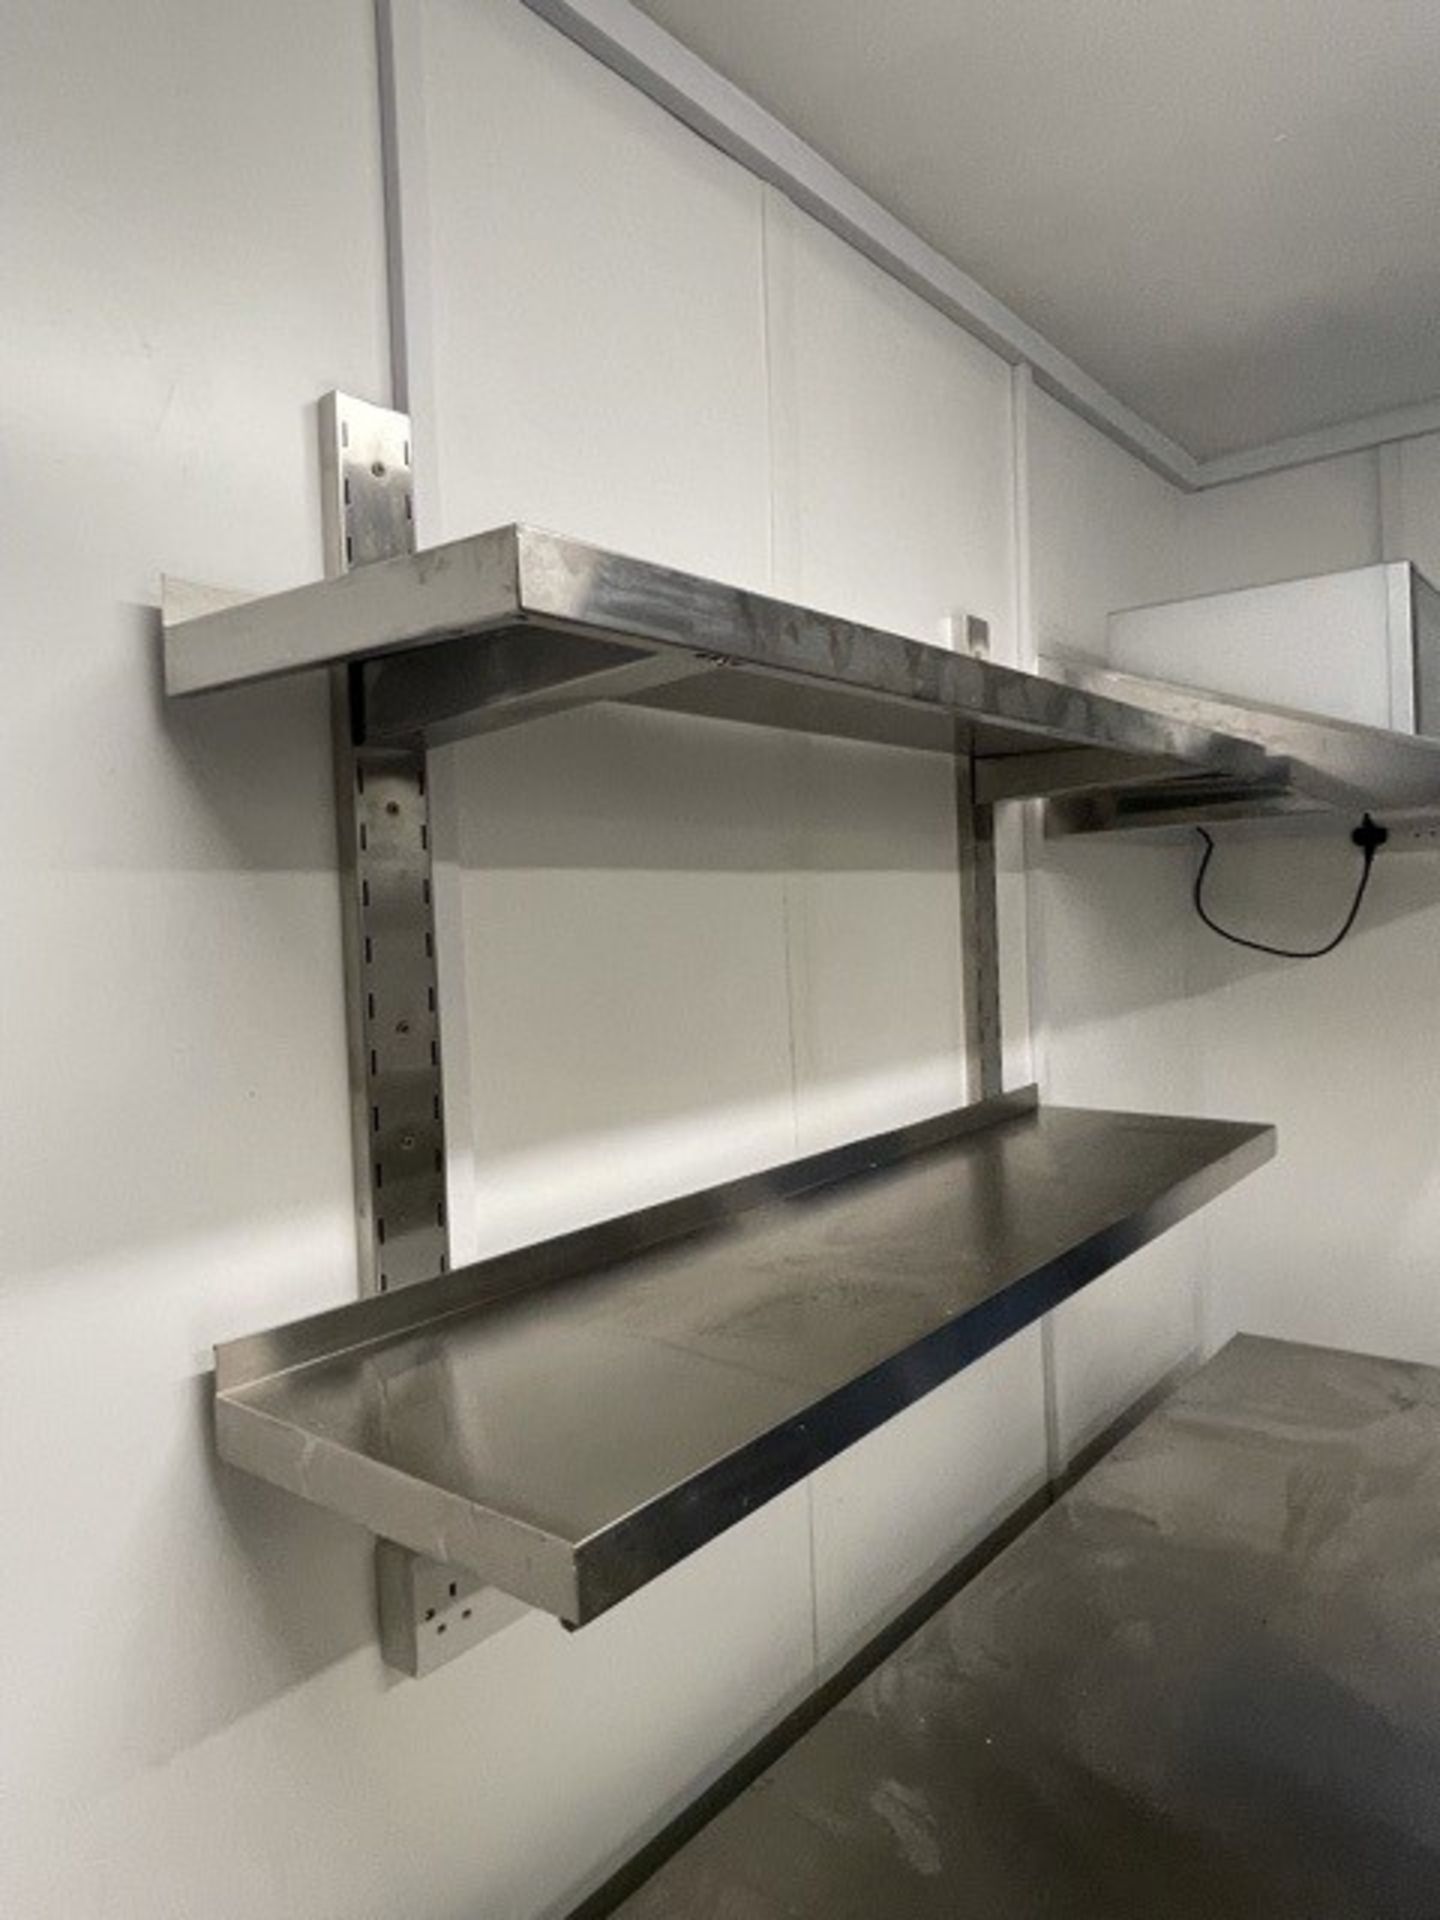 Stainless Steel Wall Shelf 2 Levels - Image 2 of 3